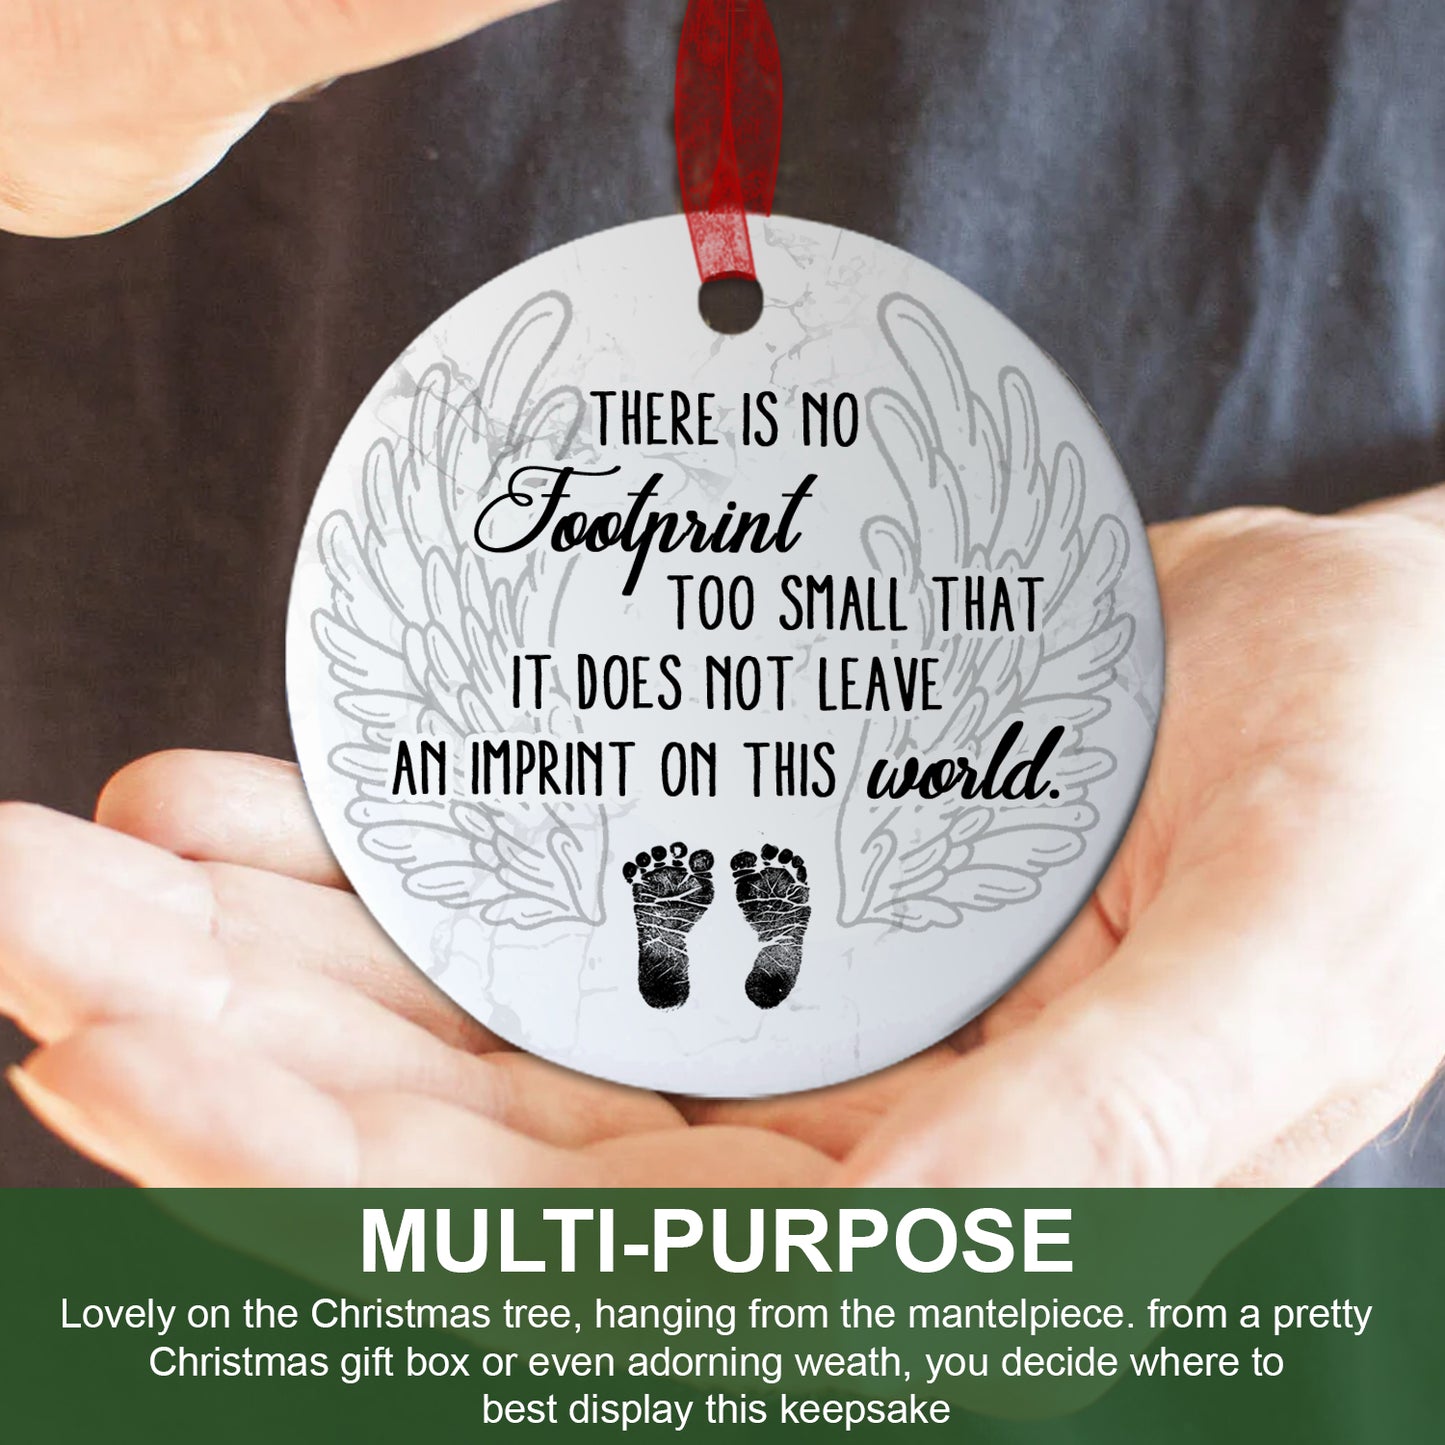 Memorial Ornament Gift for Loss of Baby, Small Footprint Not Leave an Imprint Ornament Keepsake Gifts for Miscarriage, Infant- Aluminum Metal Ornament